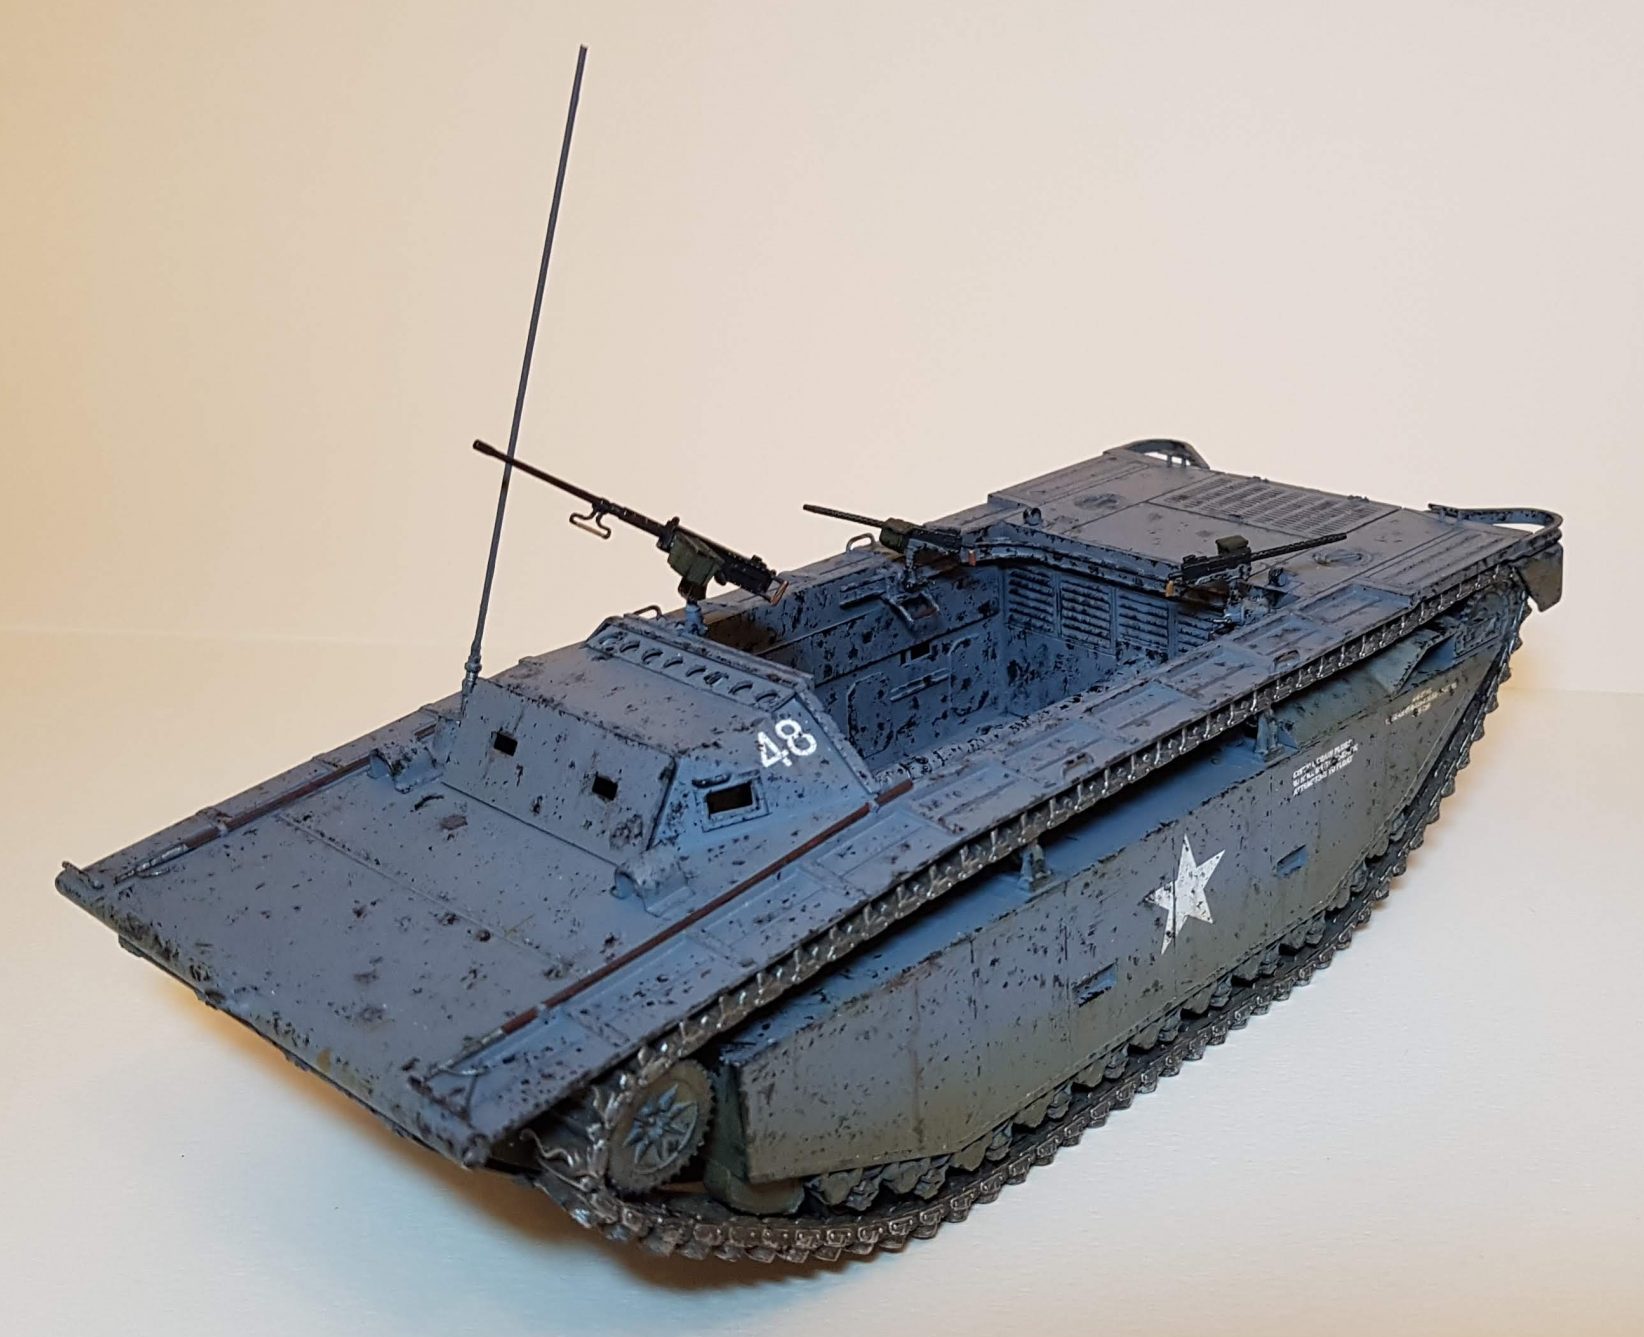 LVT-2 Amtrac (WW2) - View 1 - 1/35 Scale - Built By Wright Built - Italeri